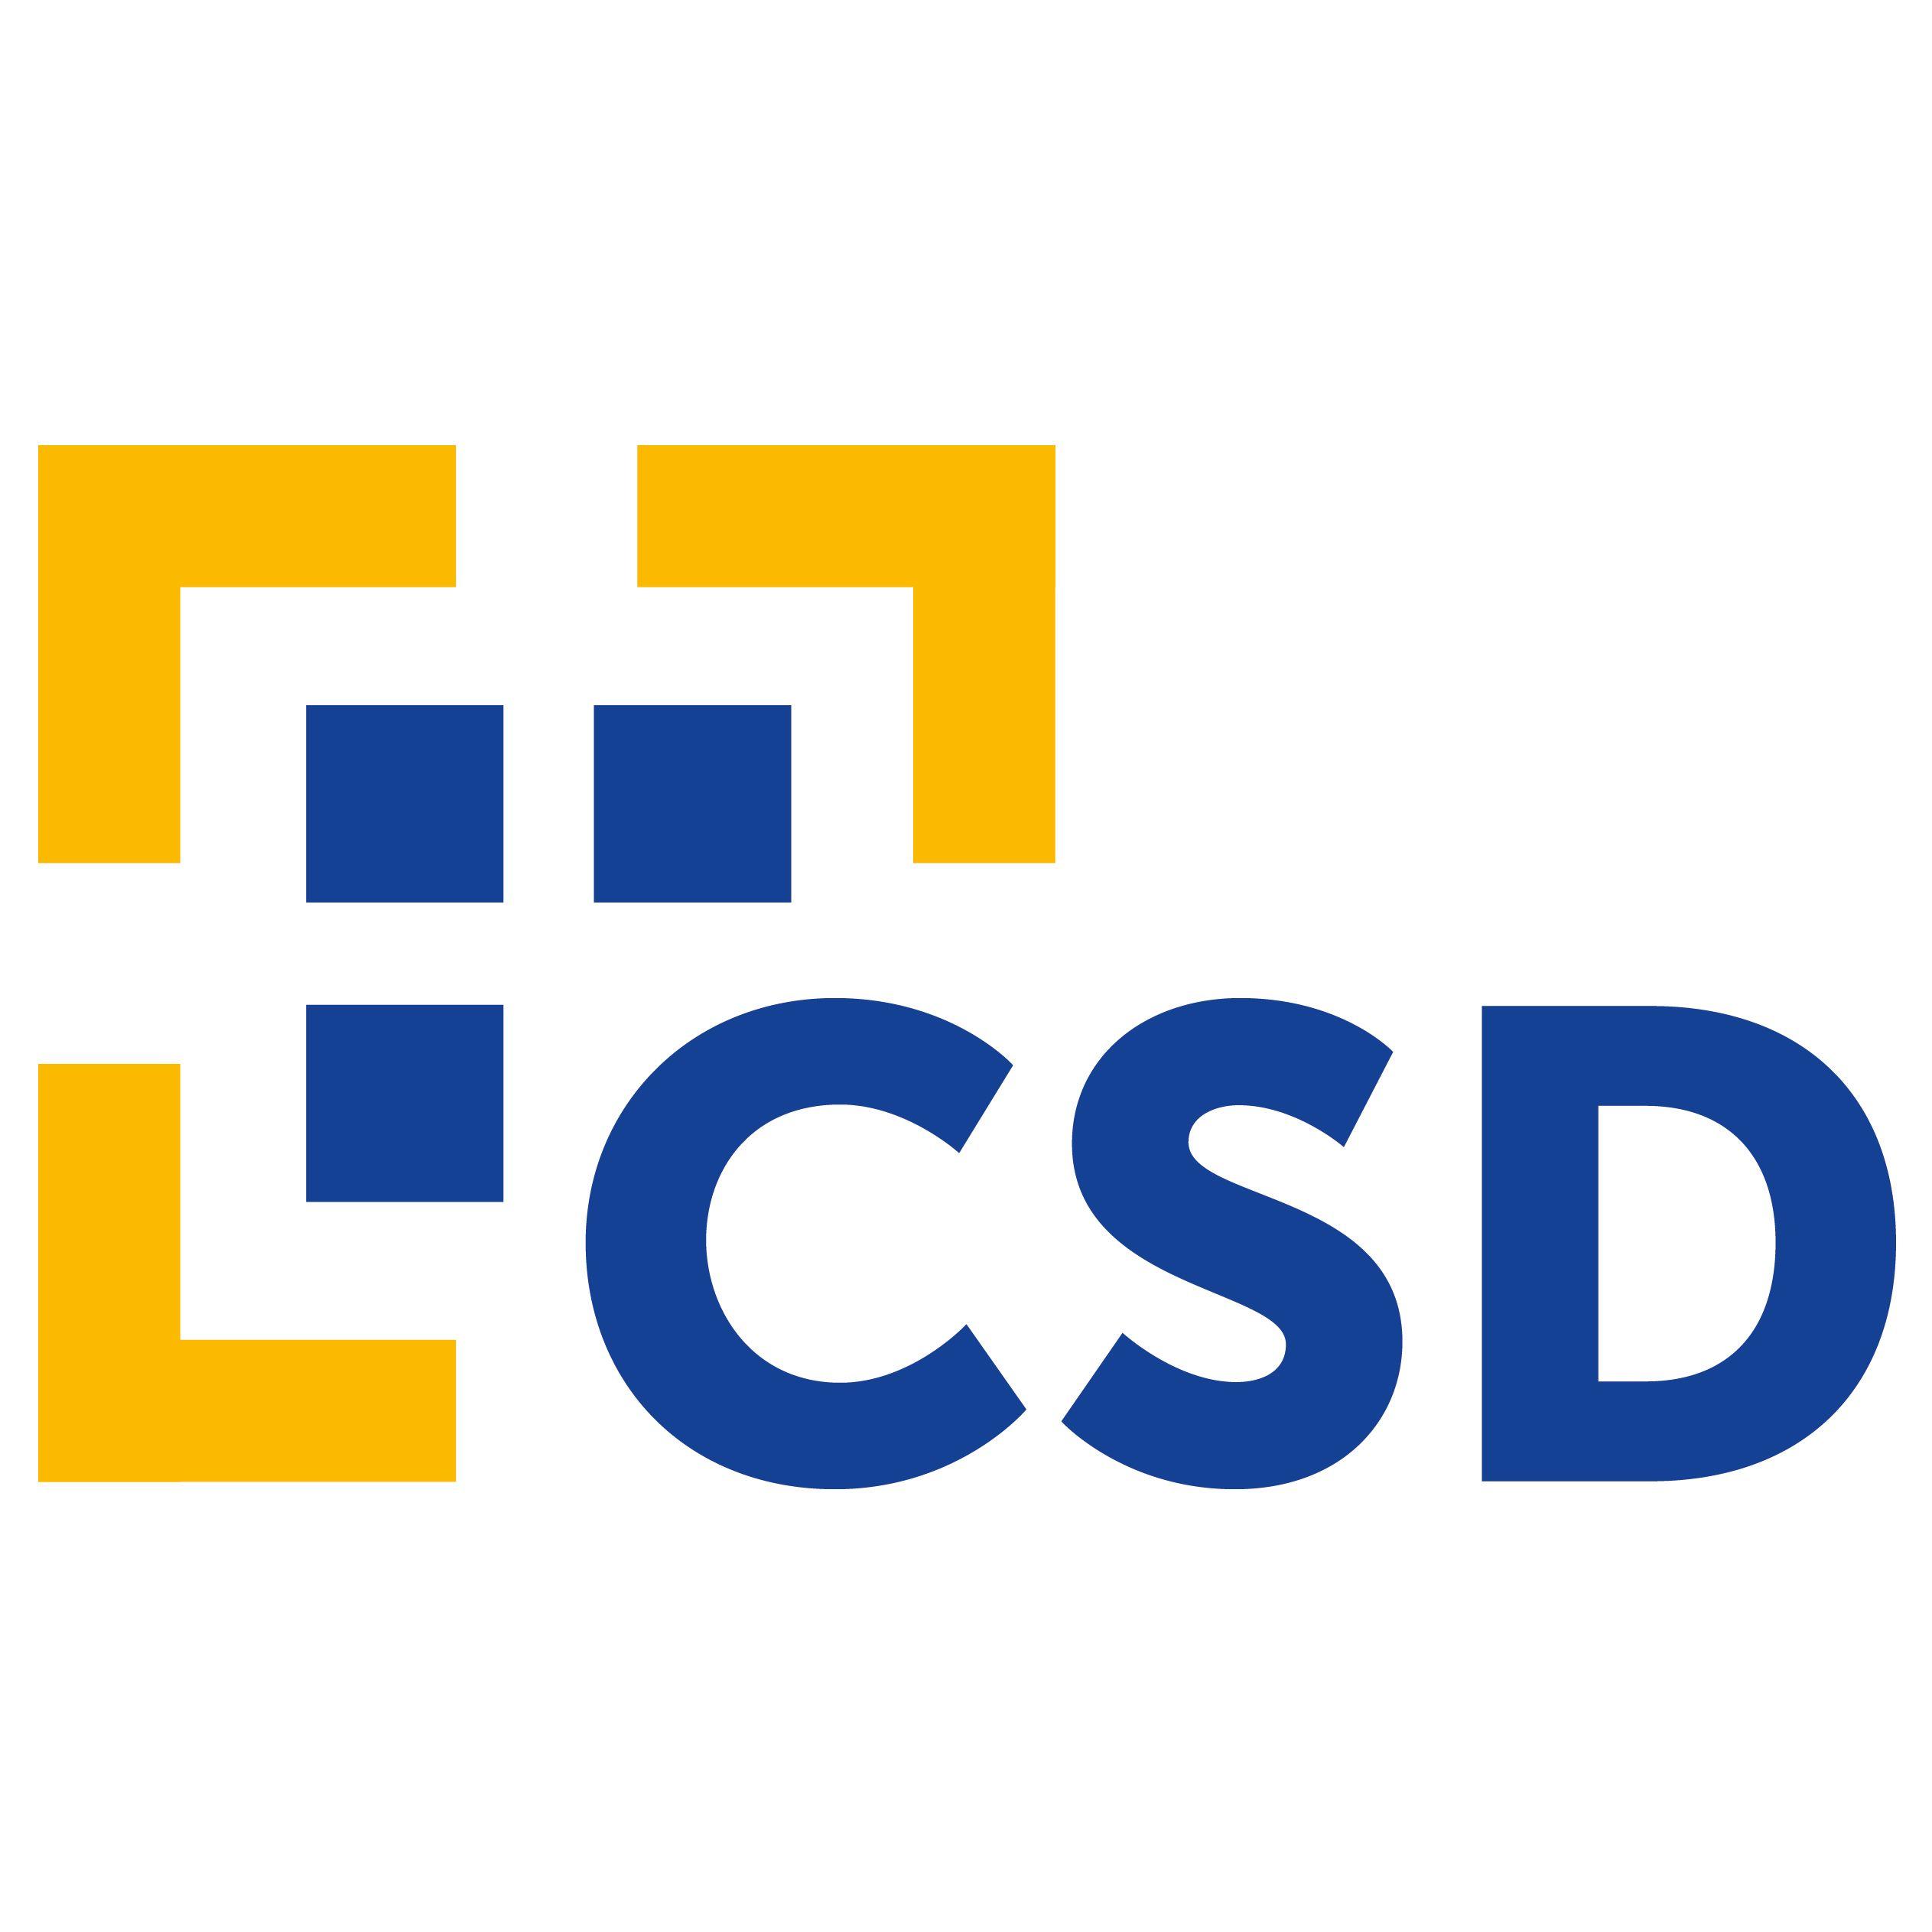 CSD Logo - CSD for Safety and Development